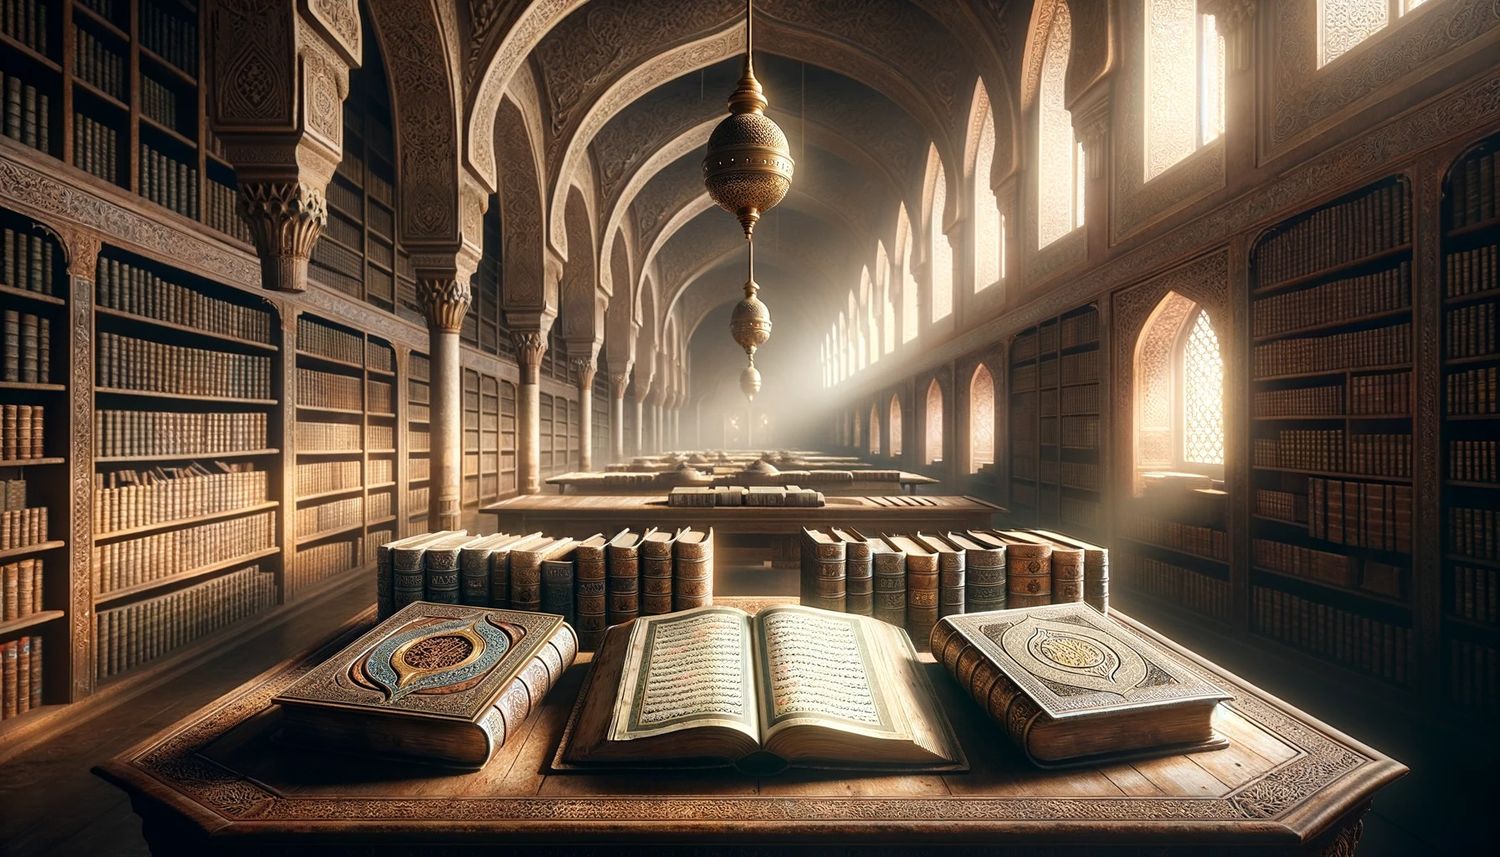 How Does The Quran View The Jewish Torah And The Christian Gospels?